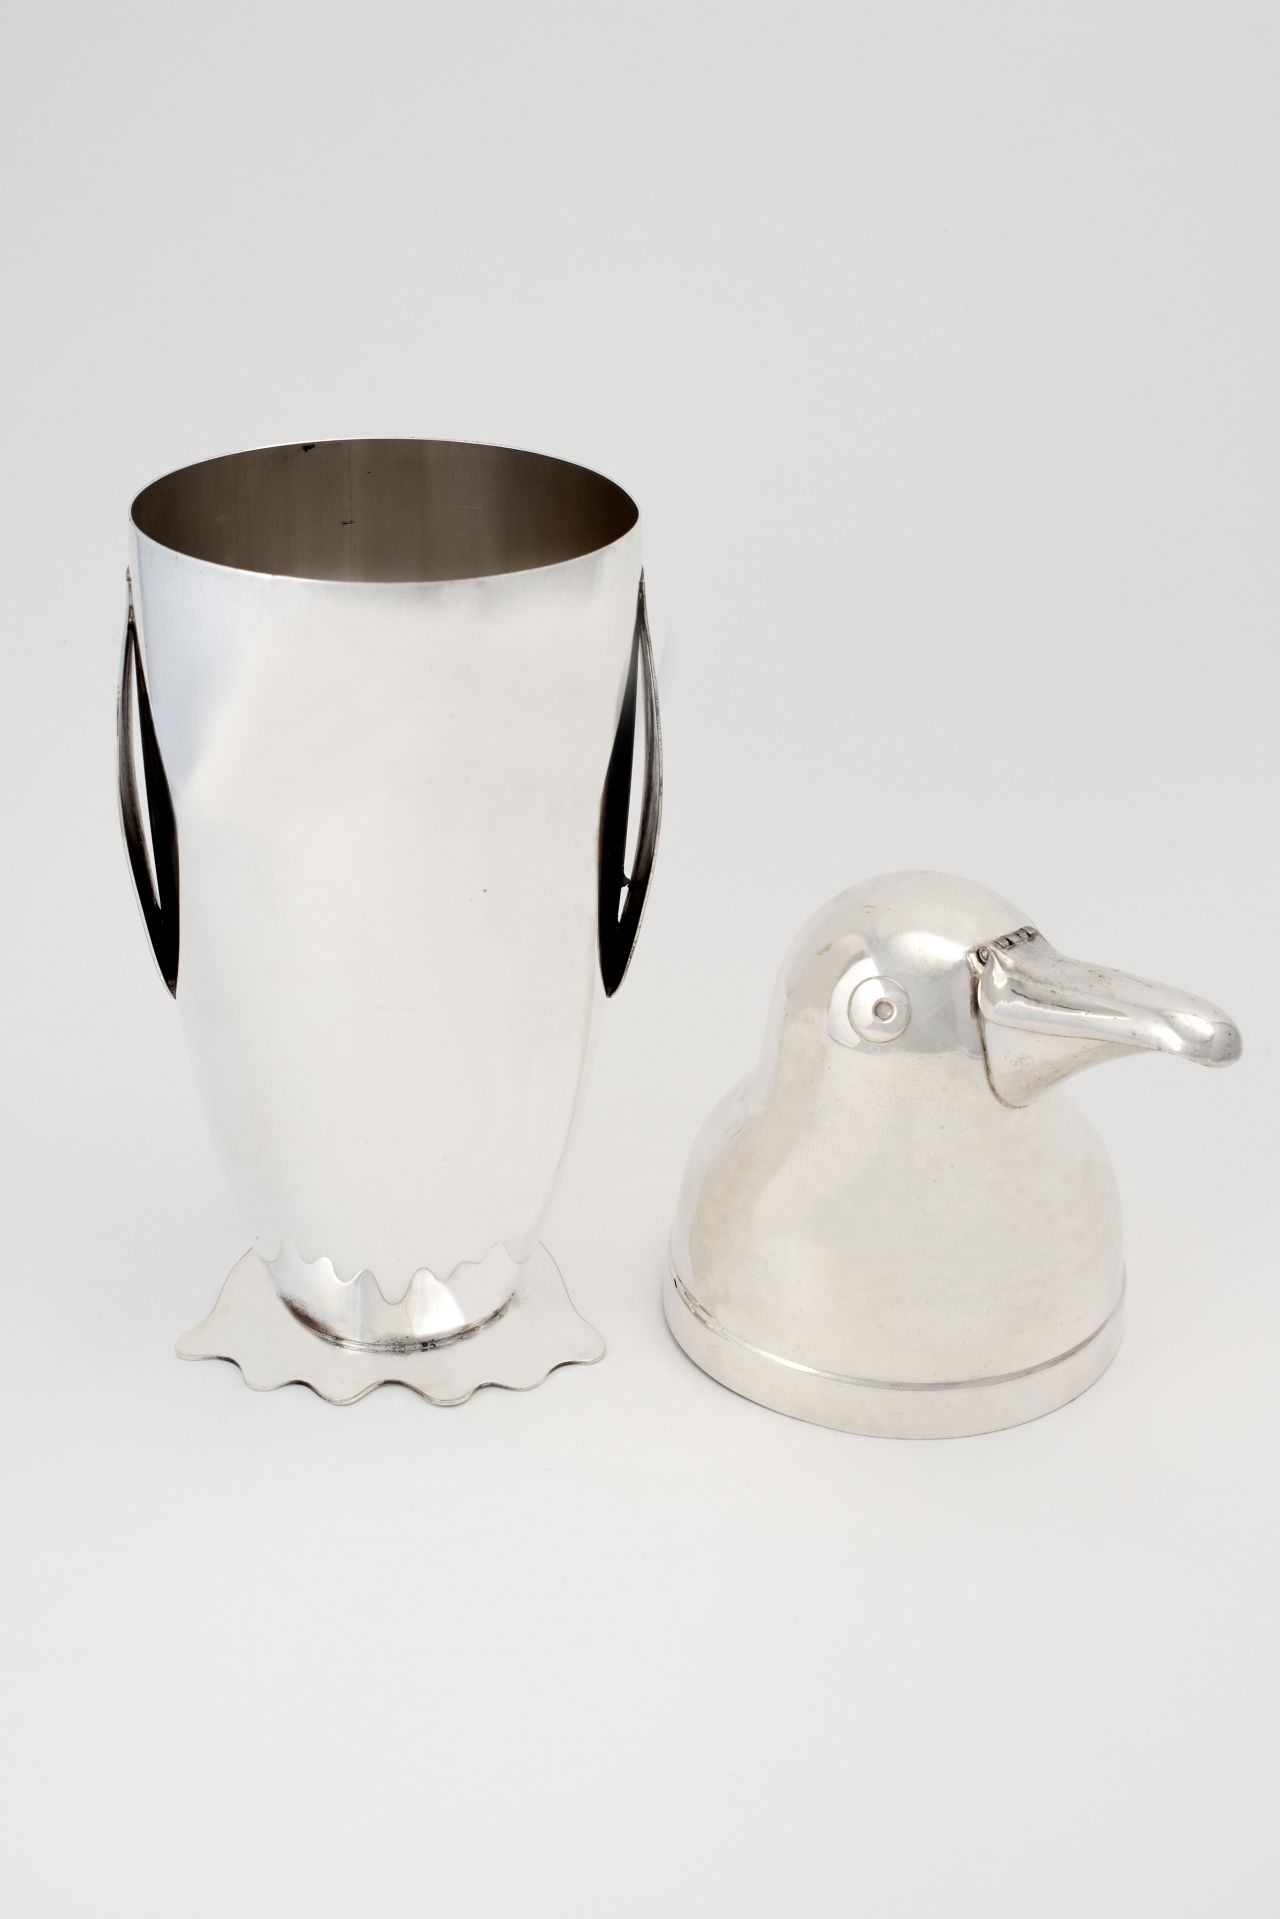 This penguin-shaped cocktail shaker "is rare to find and is in great condition," said auction curator Alan Bedwell.